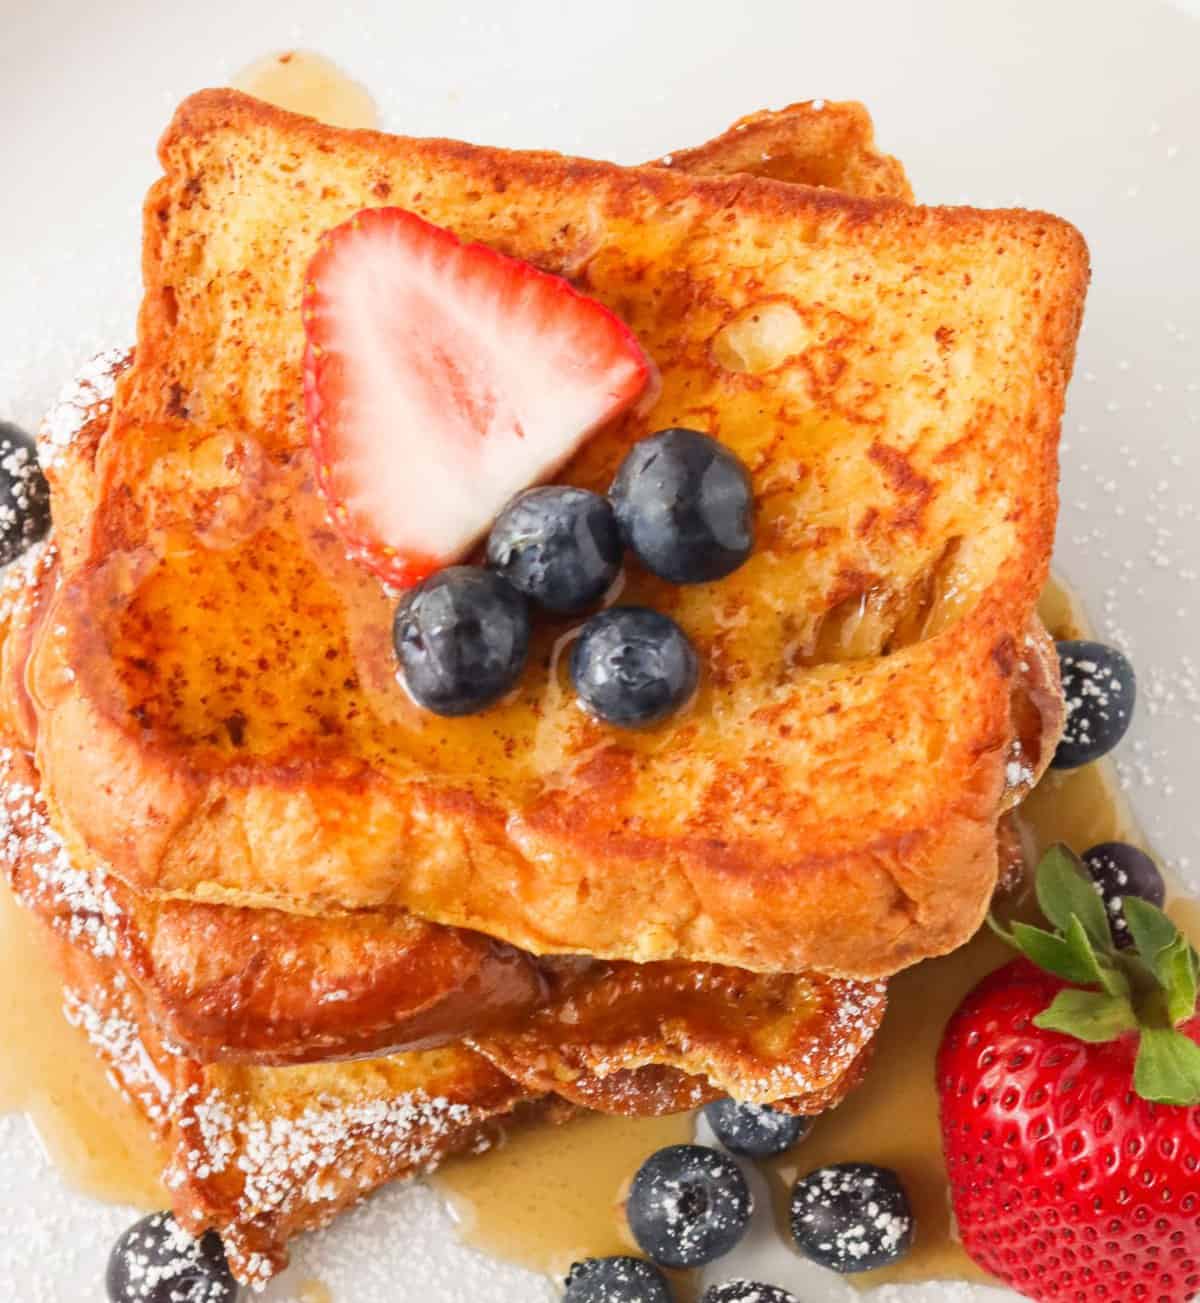 Brioche French Toast topped with strawberries and blueberries